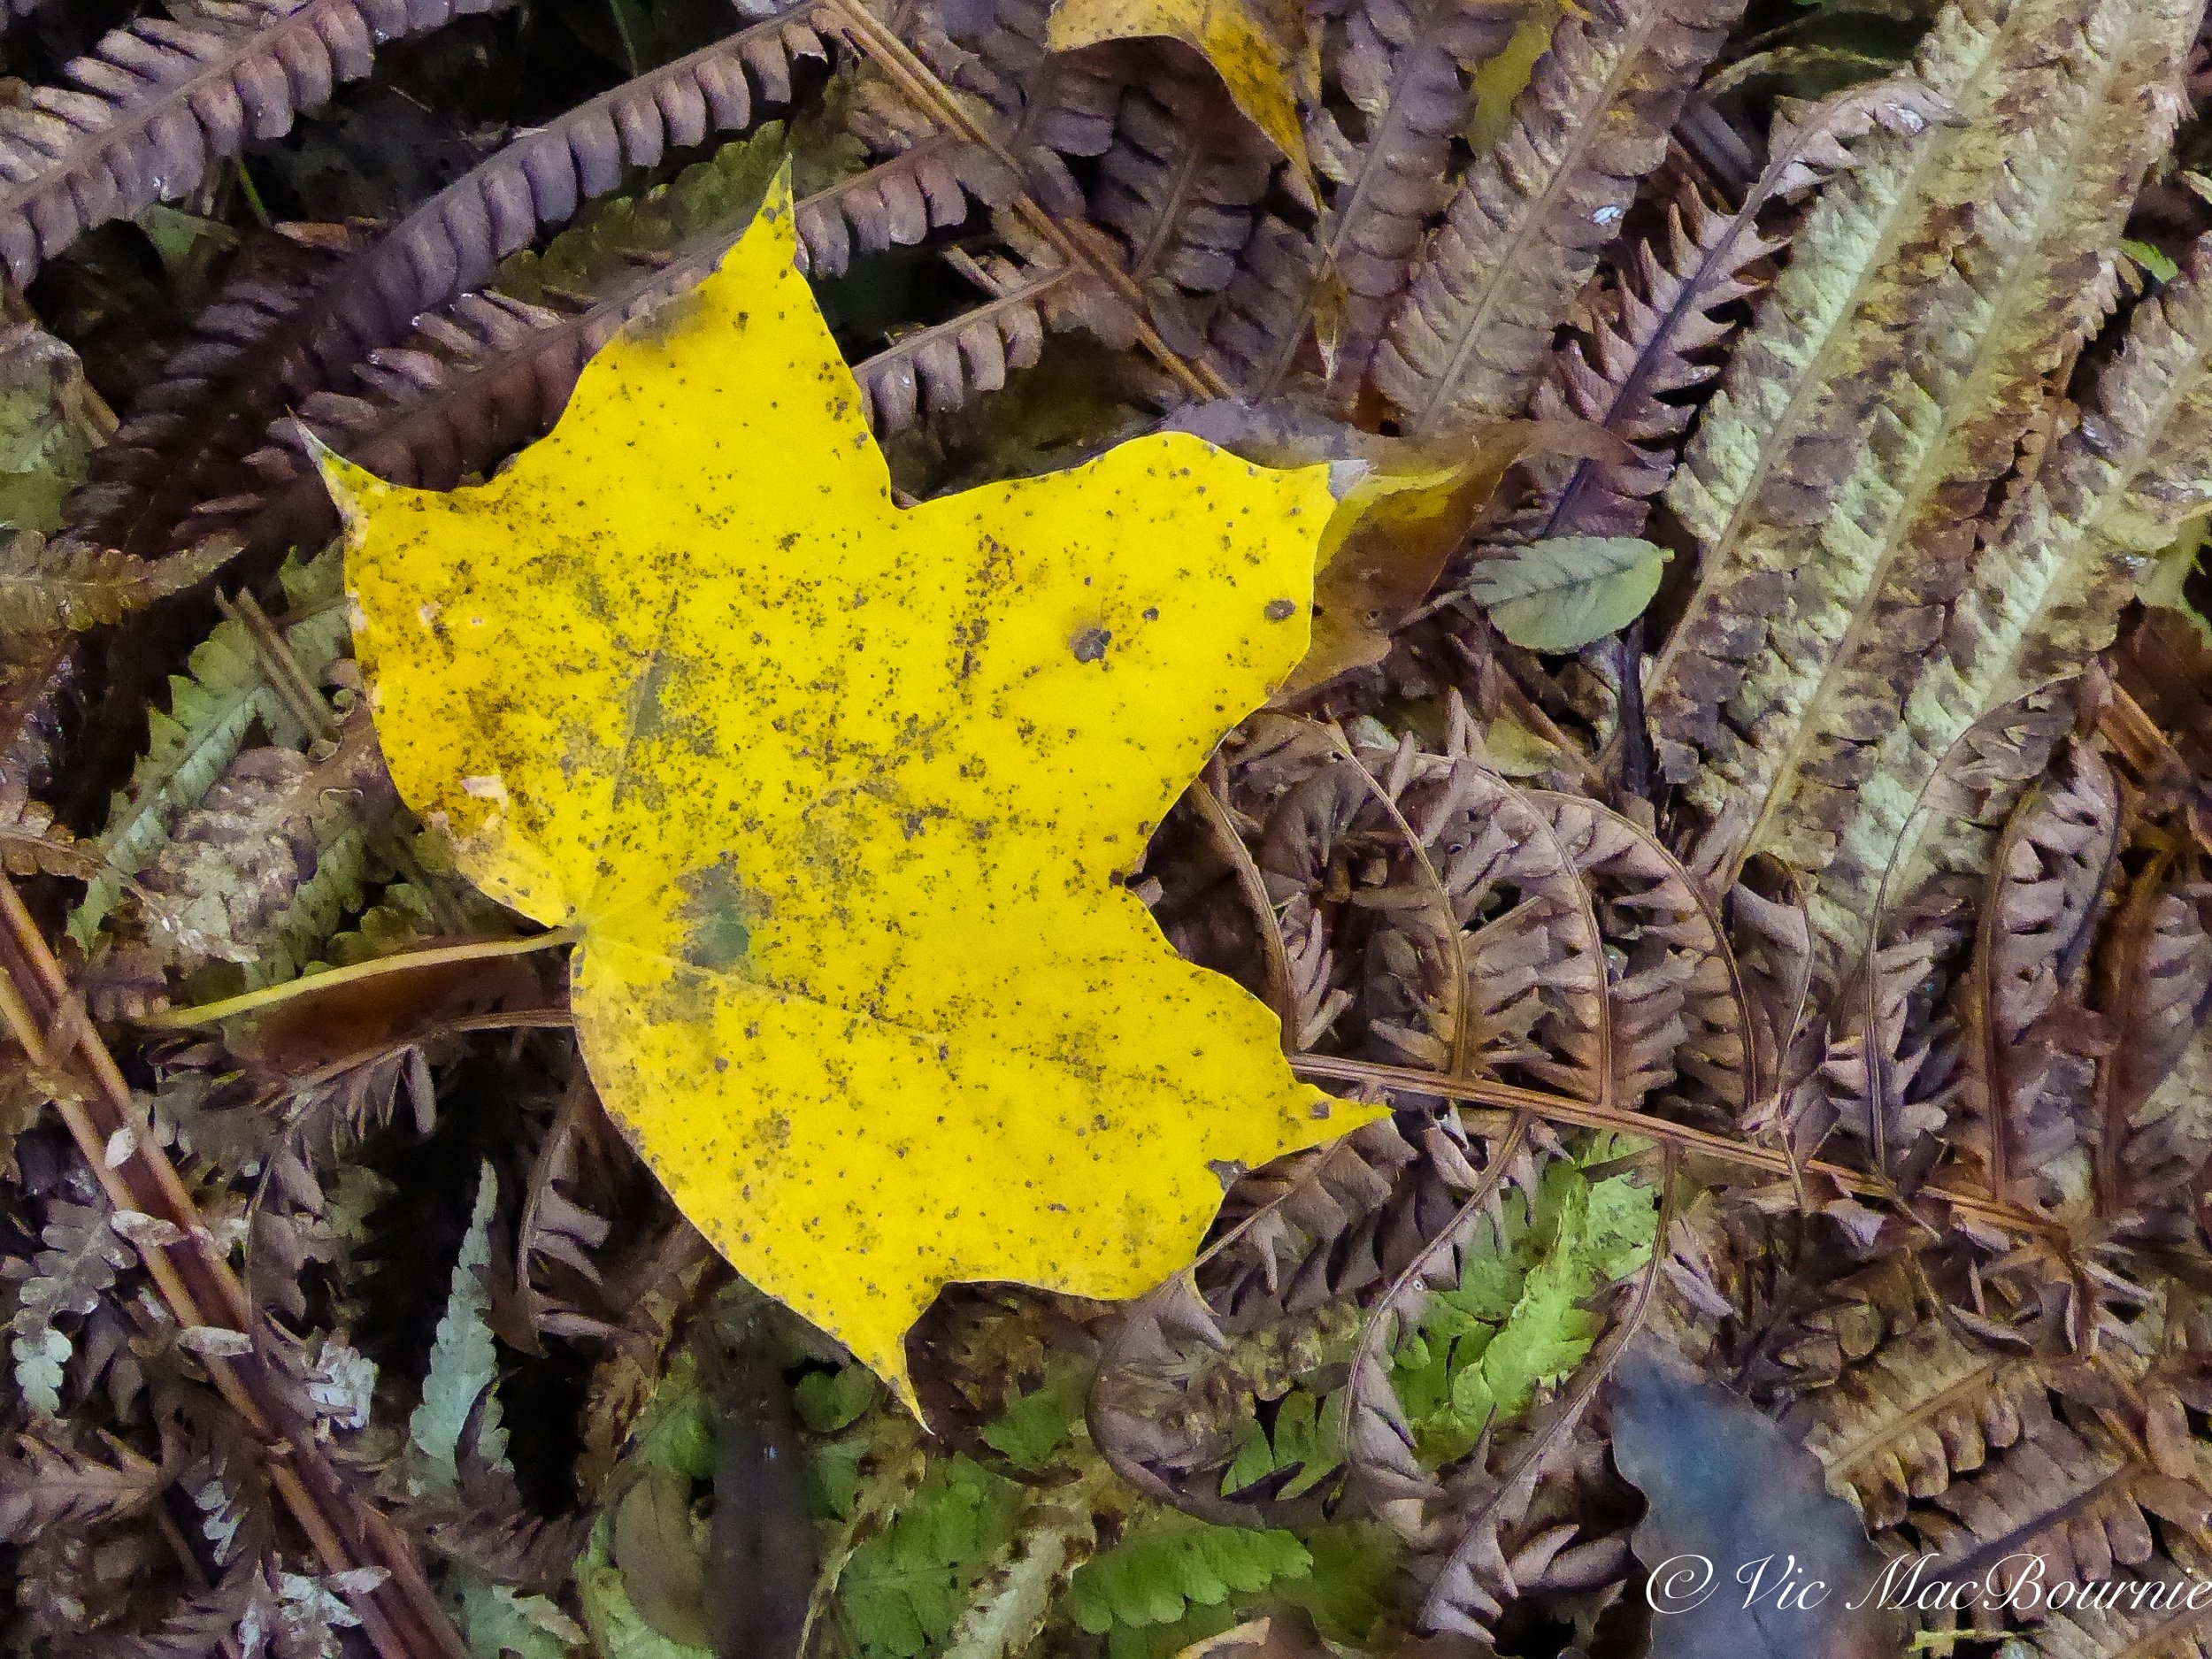 A fall Maple leaf among the ferns in the garden